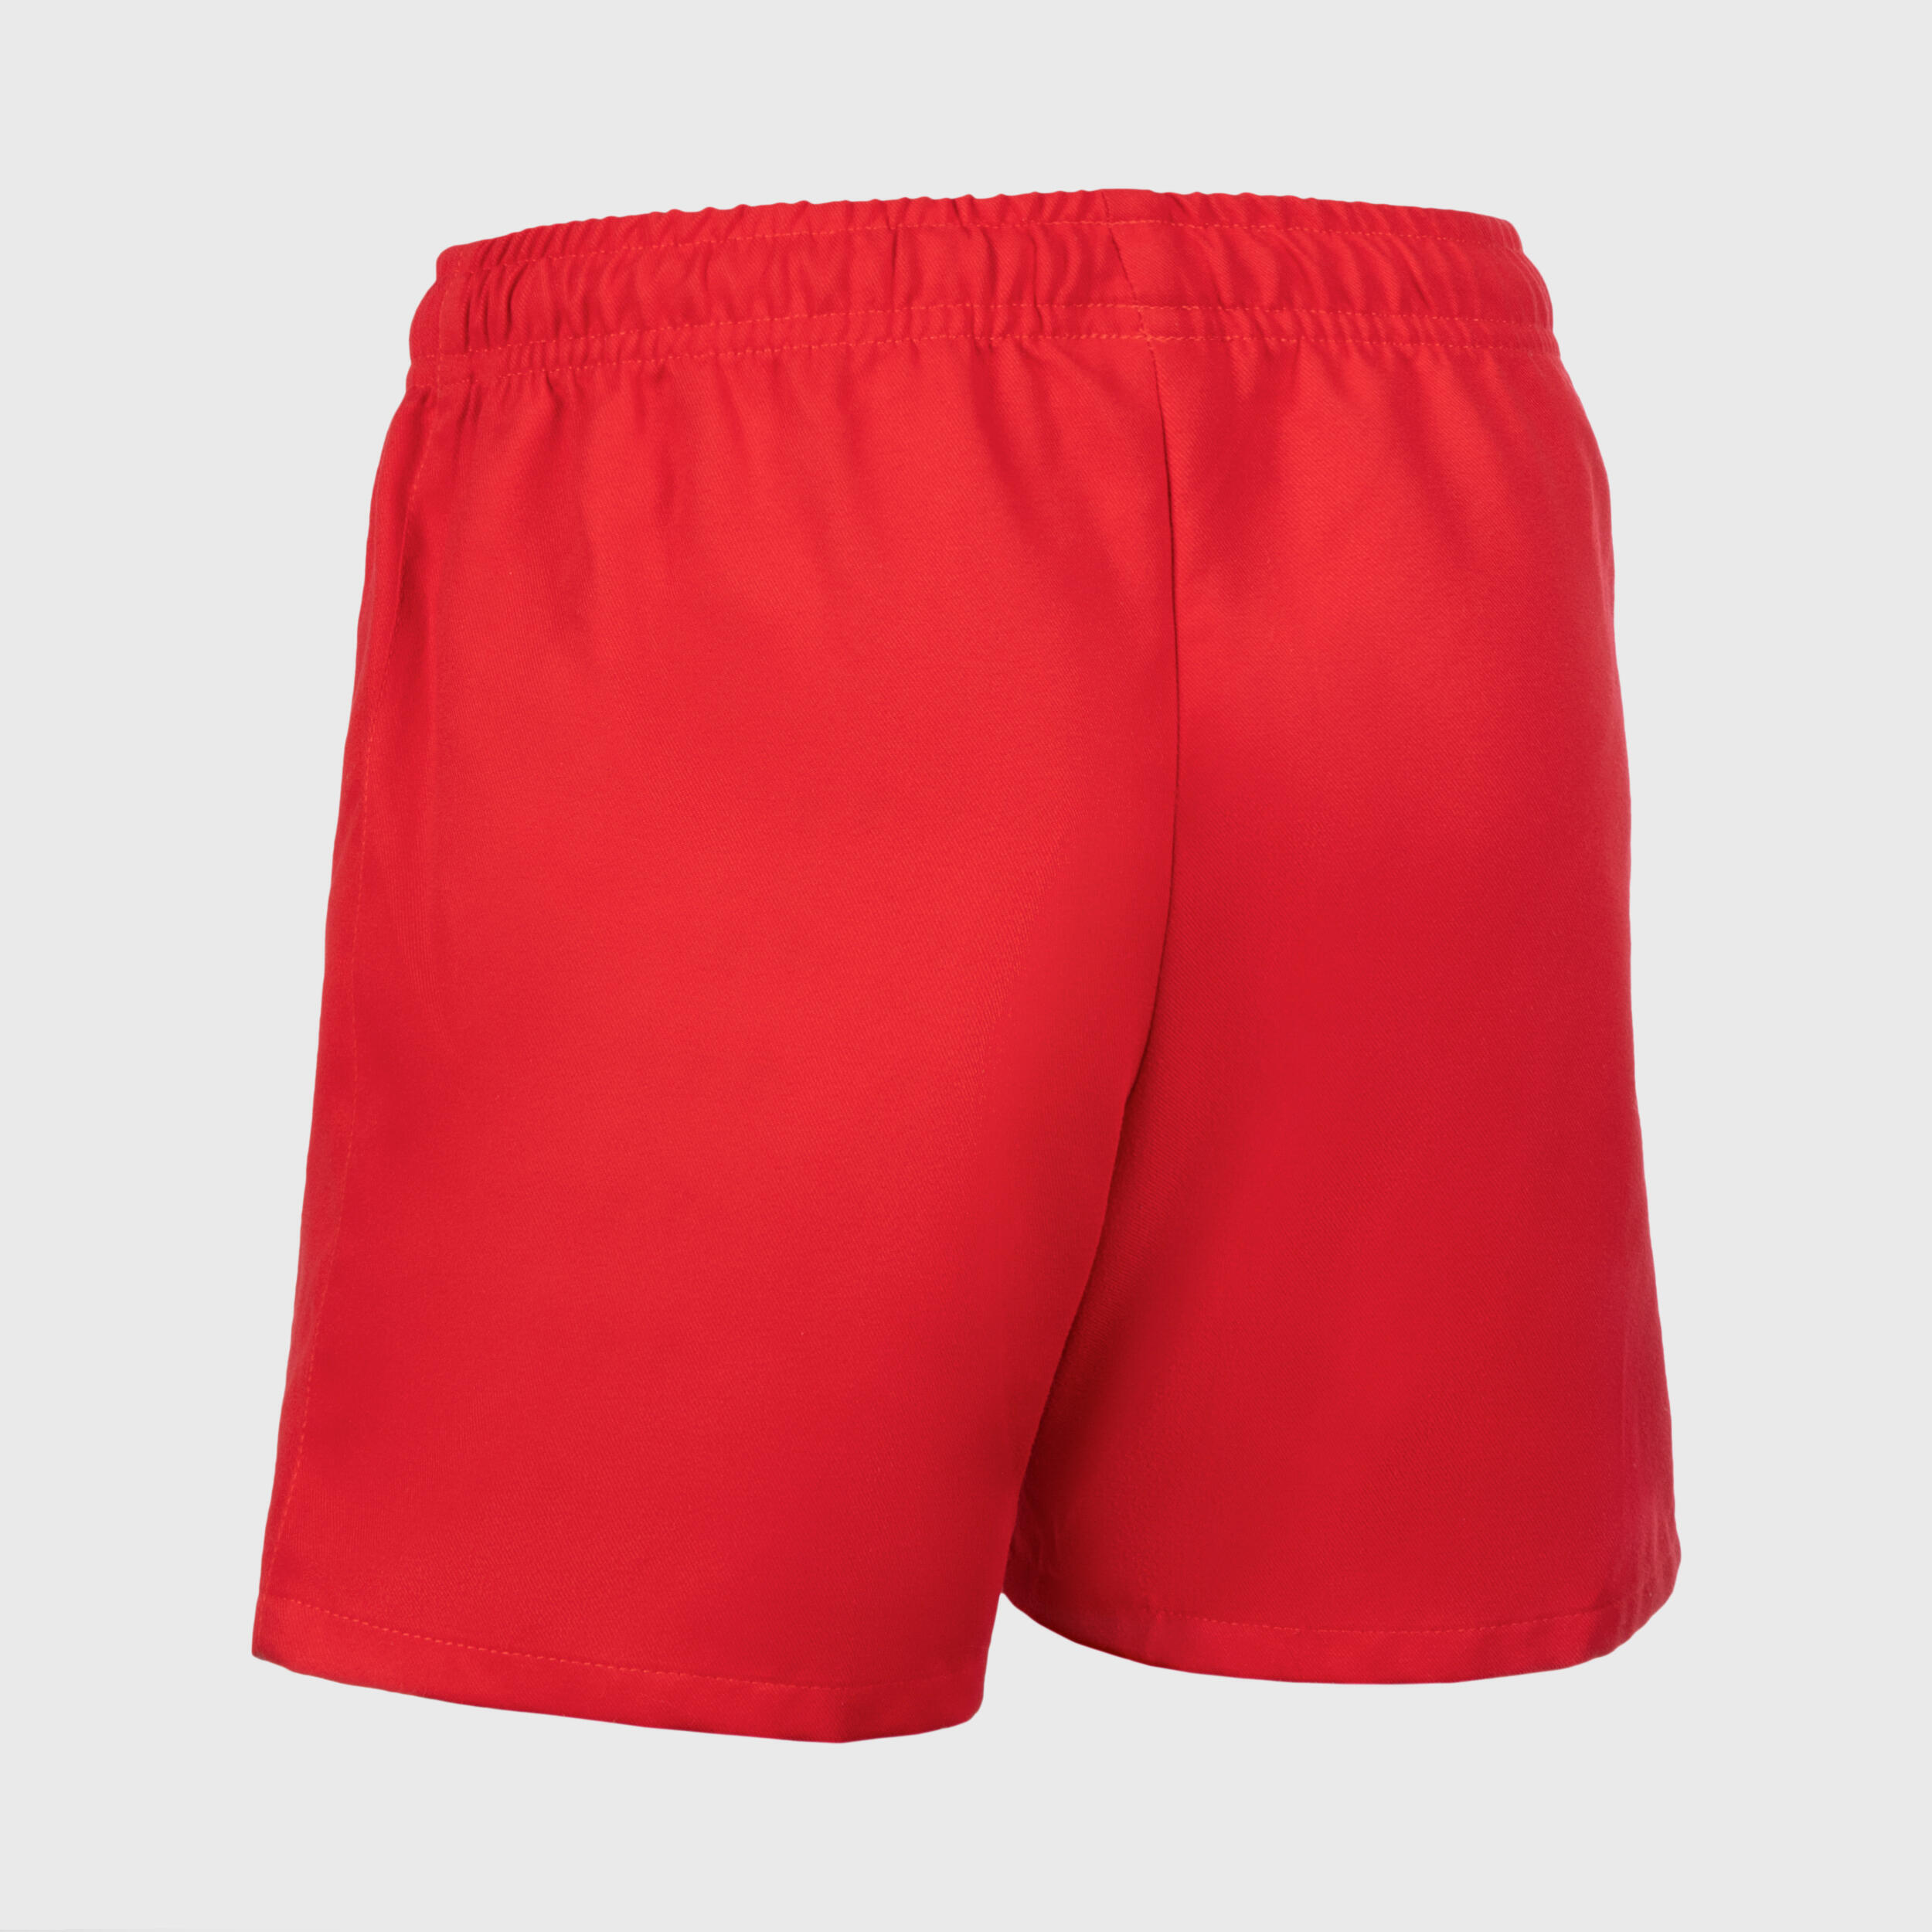 Adult Rugby Shorts with Pockets R100 - Red 2/6